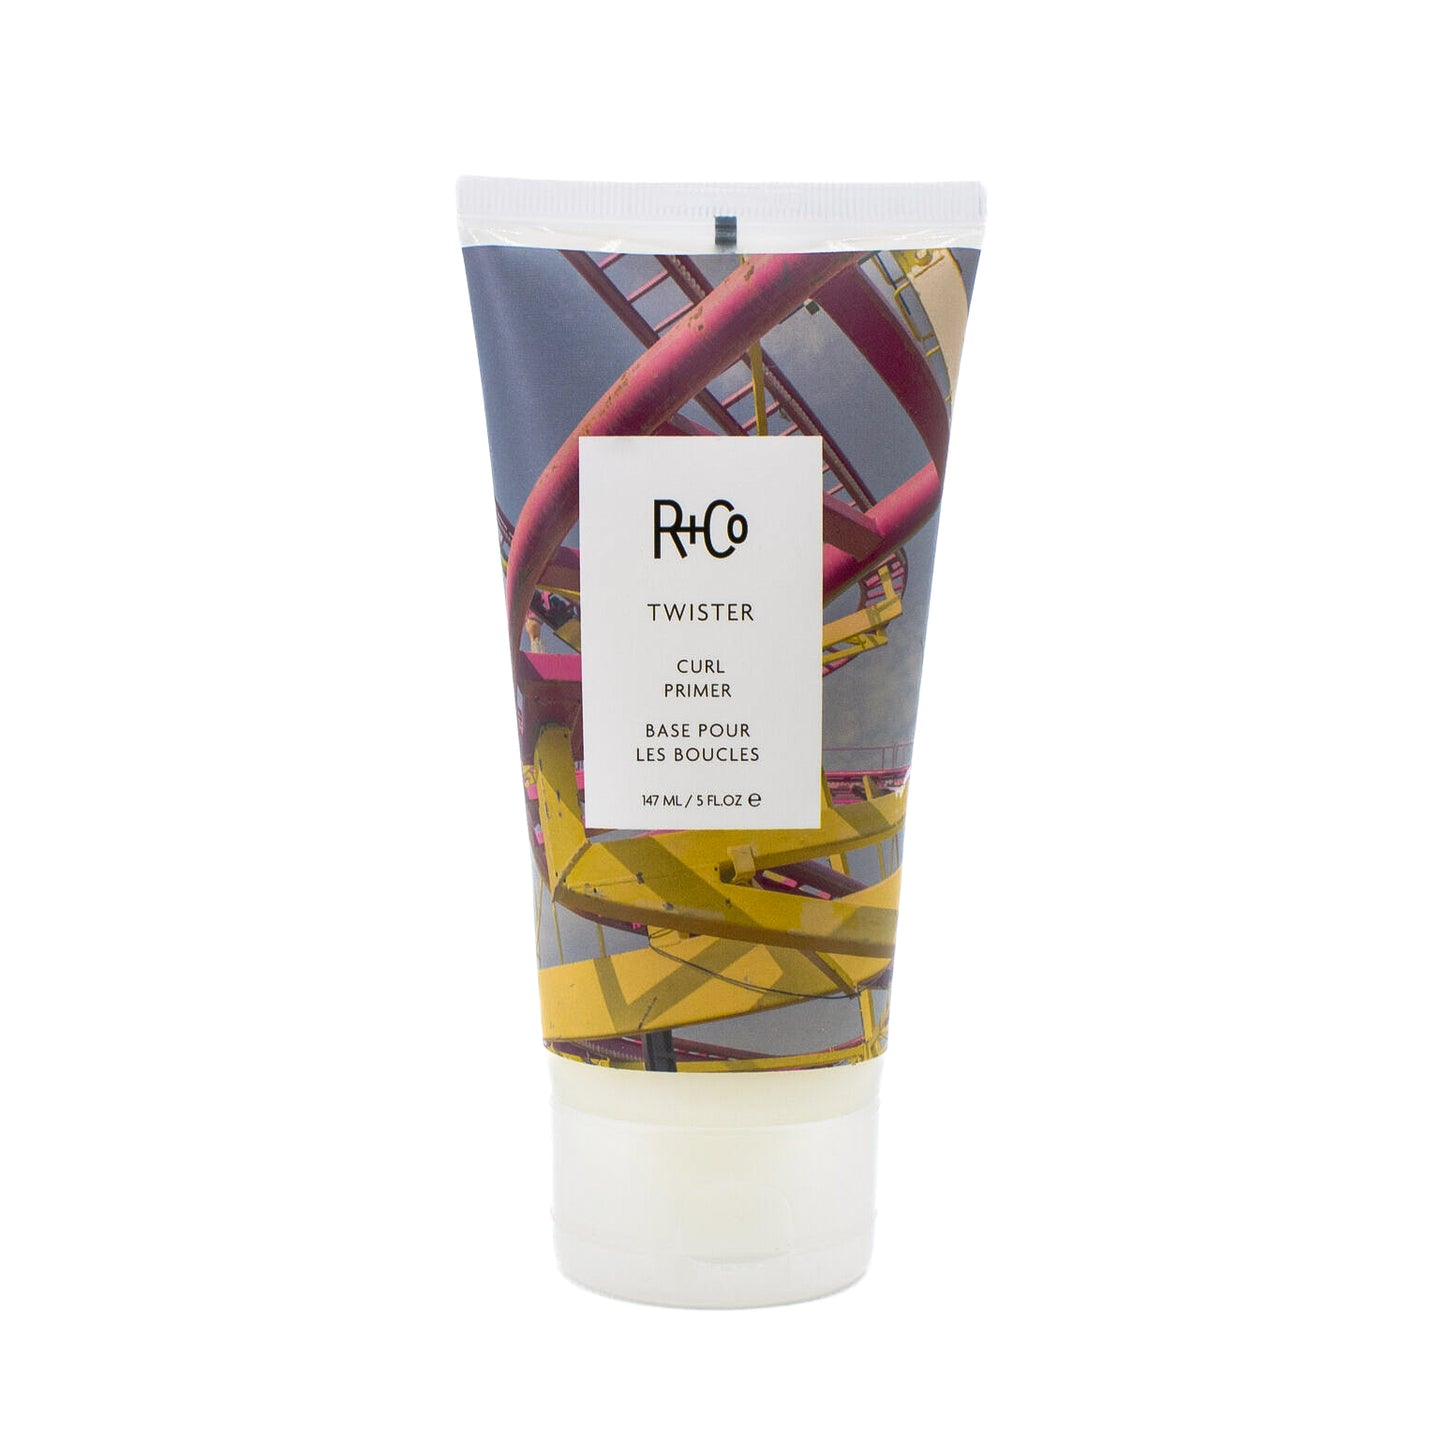 R+Co TWISTER Curl Primer 5oz - Small Amount Missing